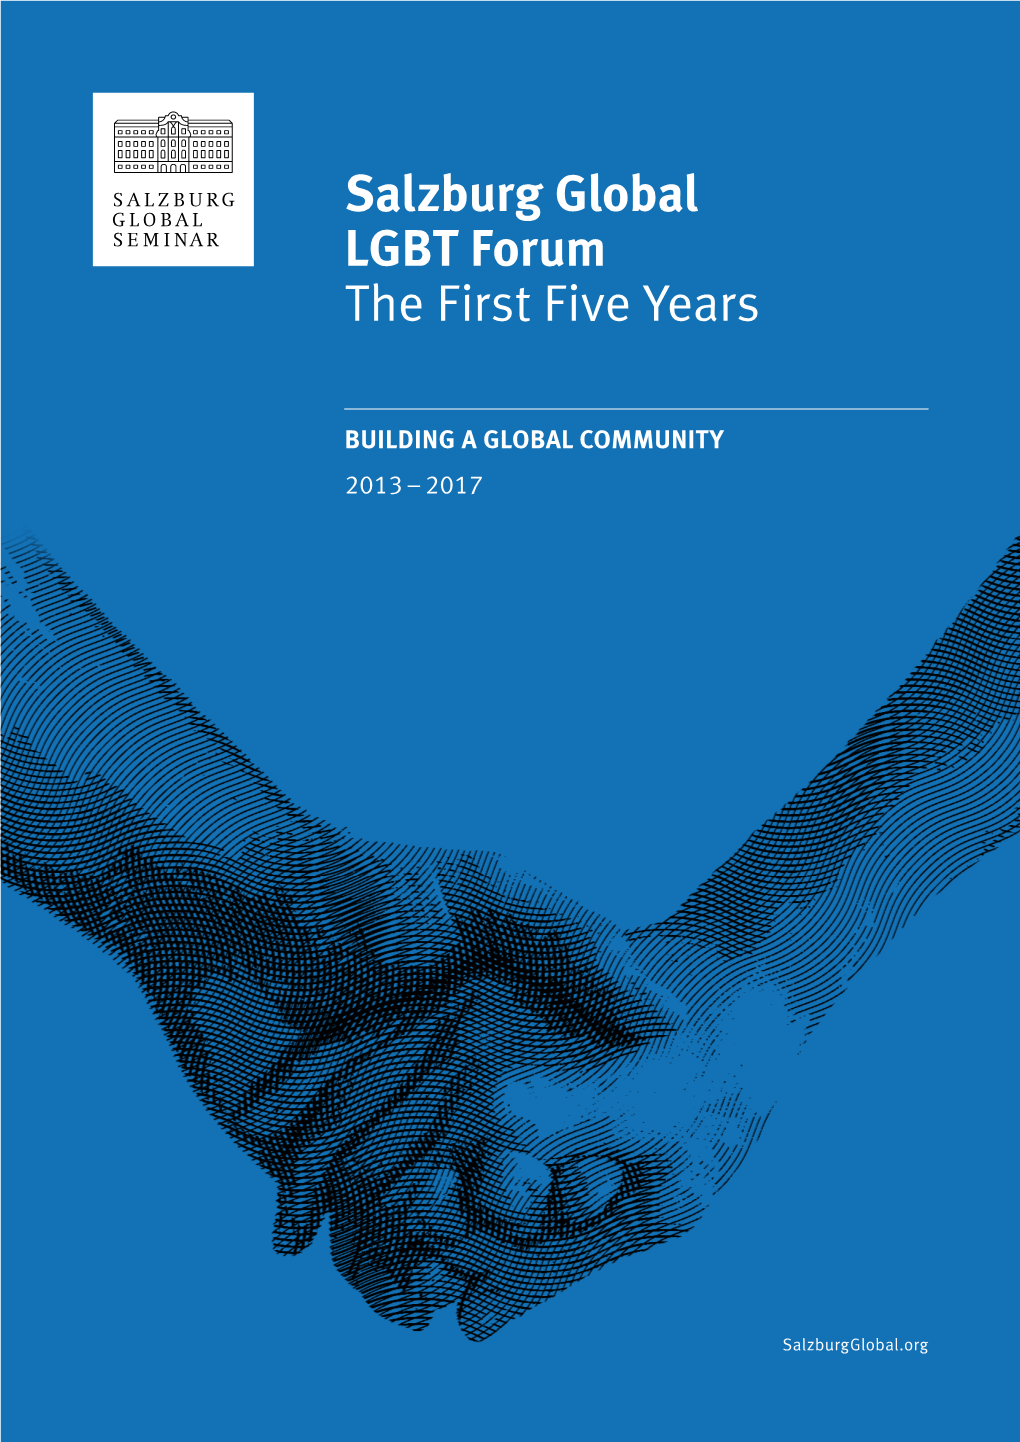 Salzburg Global LGBT Forum the First Five Years